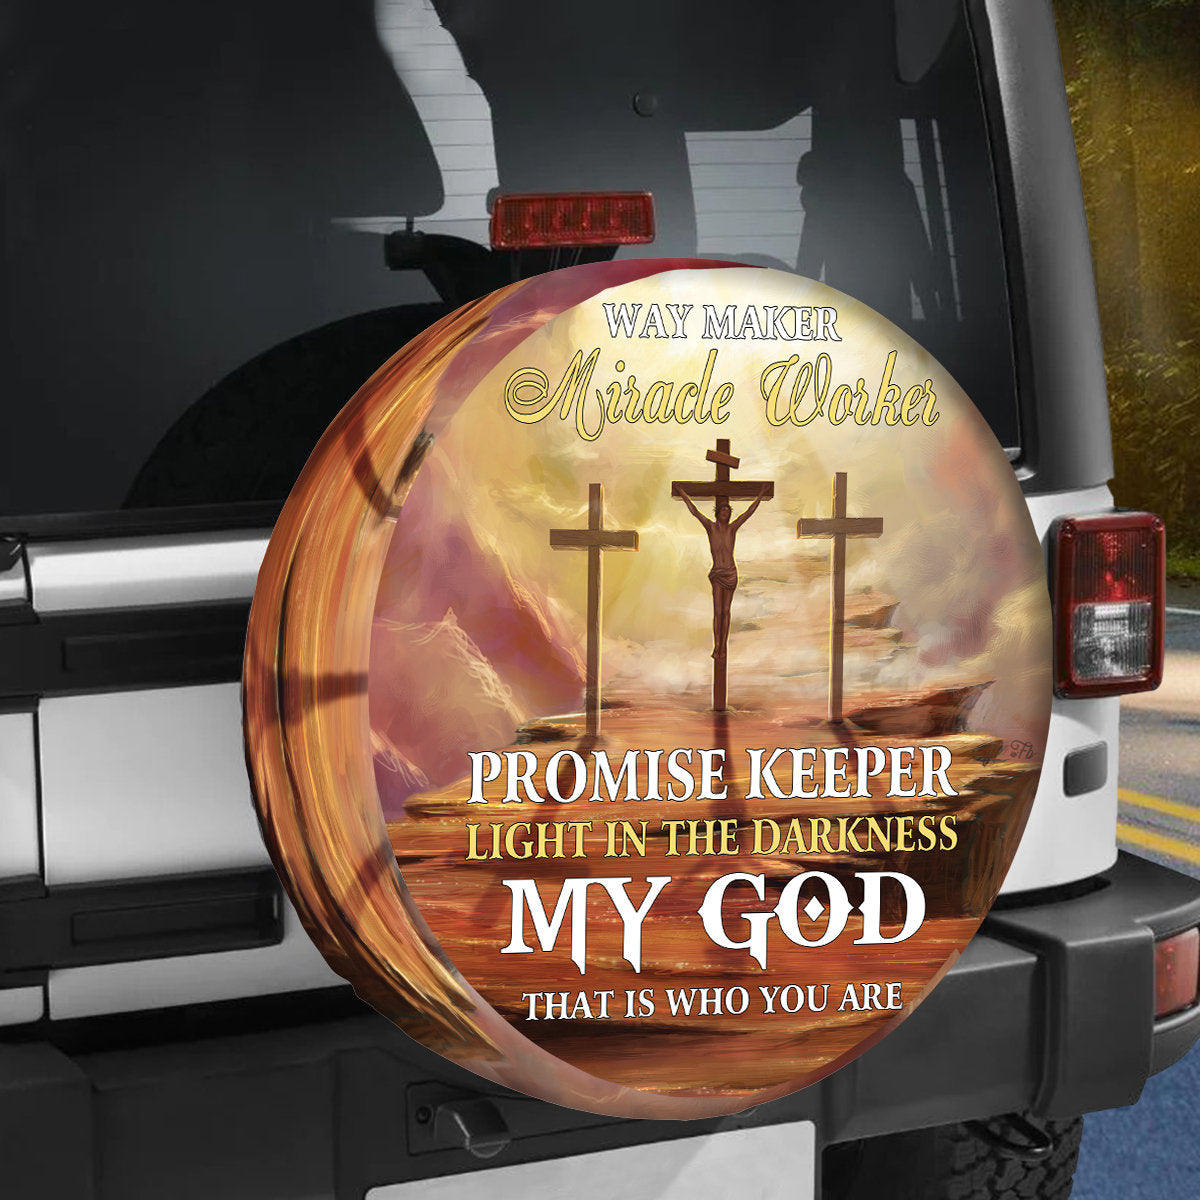 Jesus Christ Spare Tire Cover Car Accessories - Christian Tire Cover